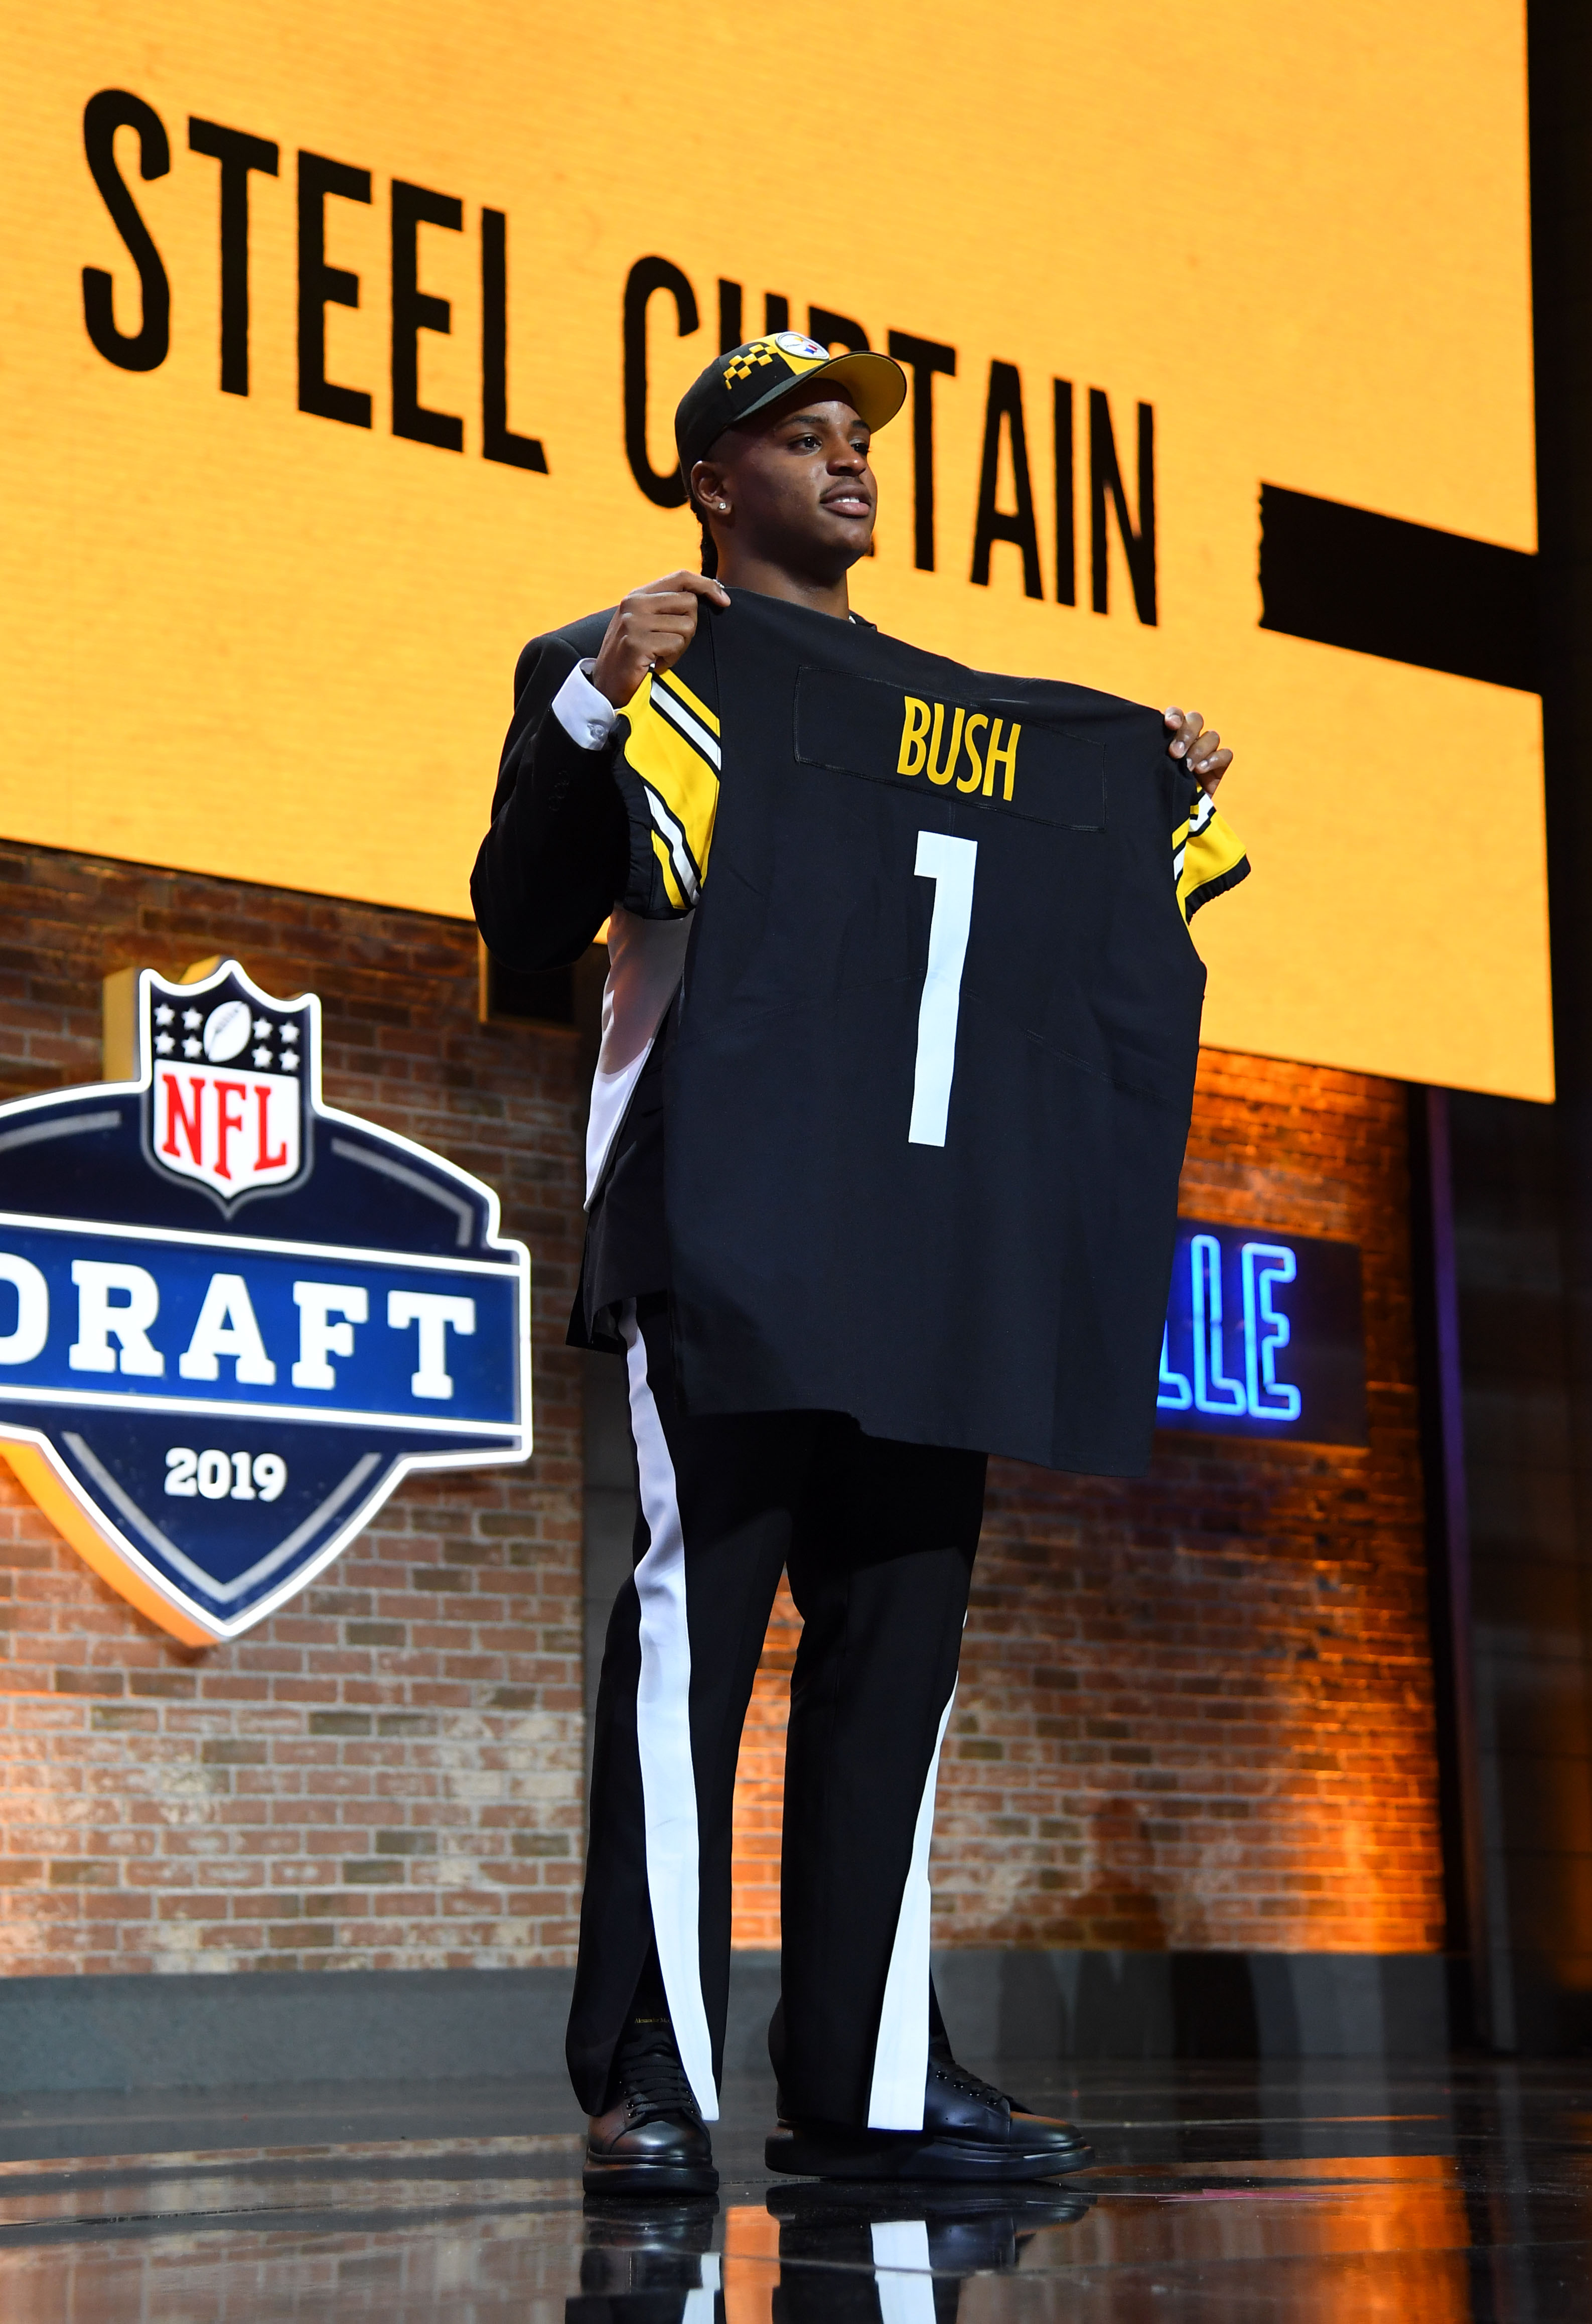 Don't expect baptism by fire for Steelers rookie Devin Bush